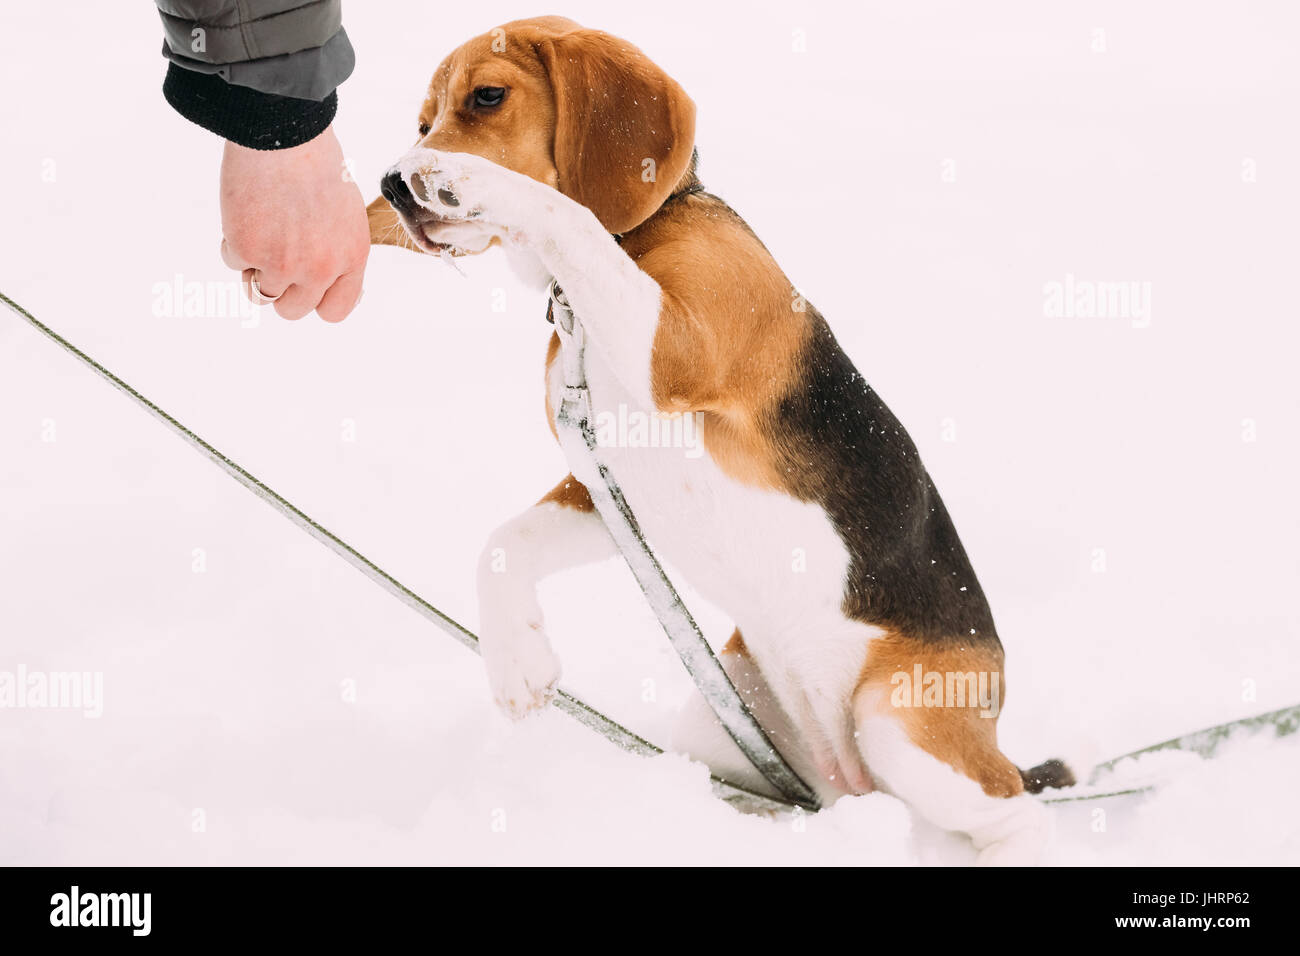 Beautiful Tricolor Puppy Of English Beagle Giving Paw To Owner, Shaking Hand And Paw. Friendship Between Pet, Dog And Human. Dog Playing In Snow At Wi Stock Photo